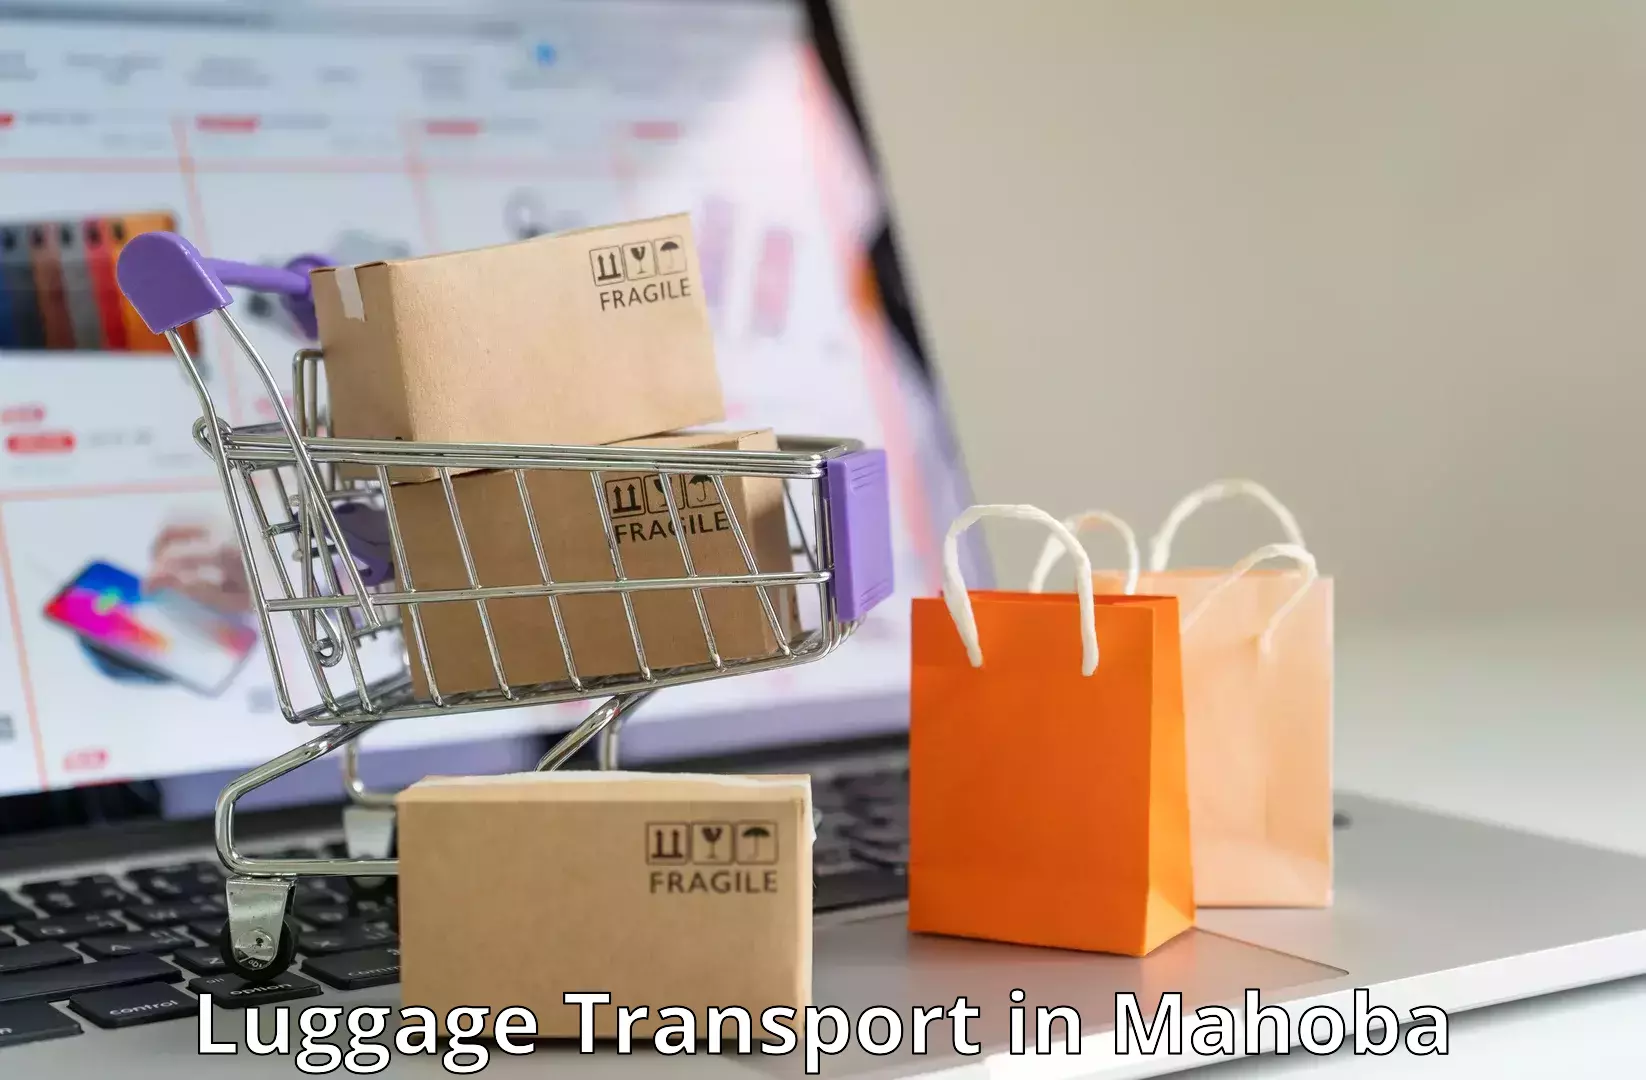 Luggage transport consulting in Mahoba